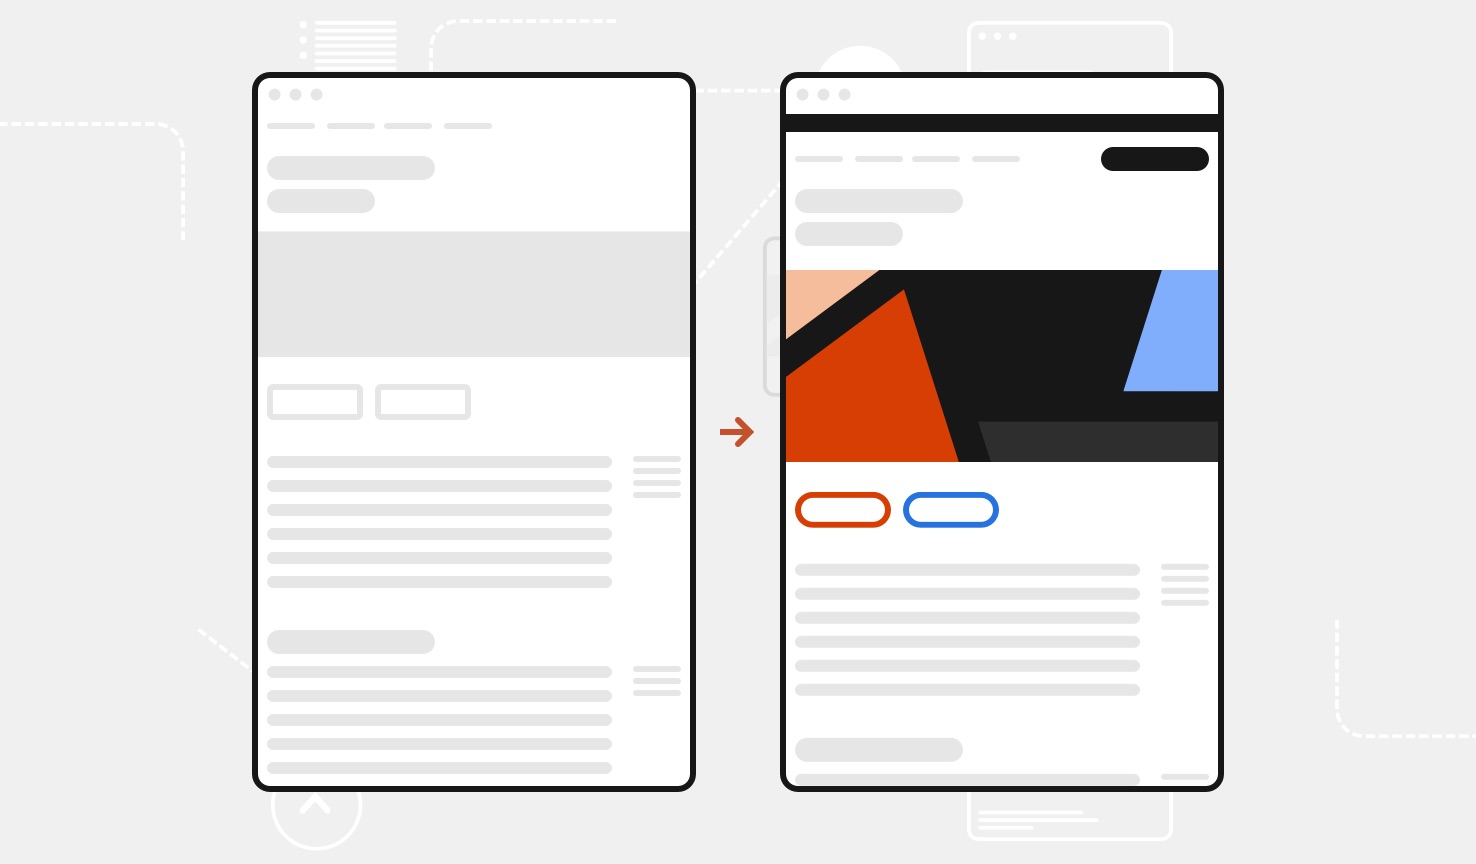 Side by side illustrations show before-and-after examples of a web page. One has the original page and the other shows that page with just a few design system components added